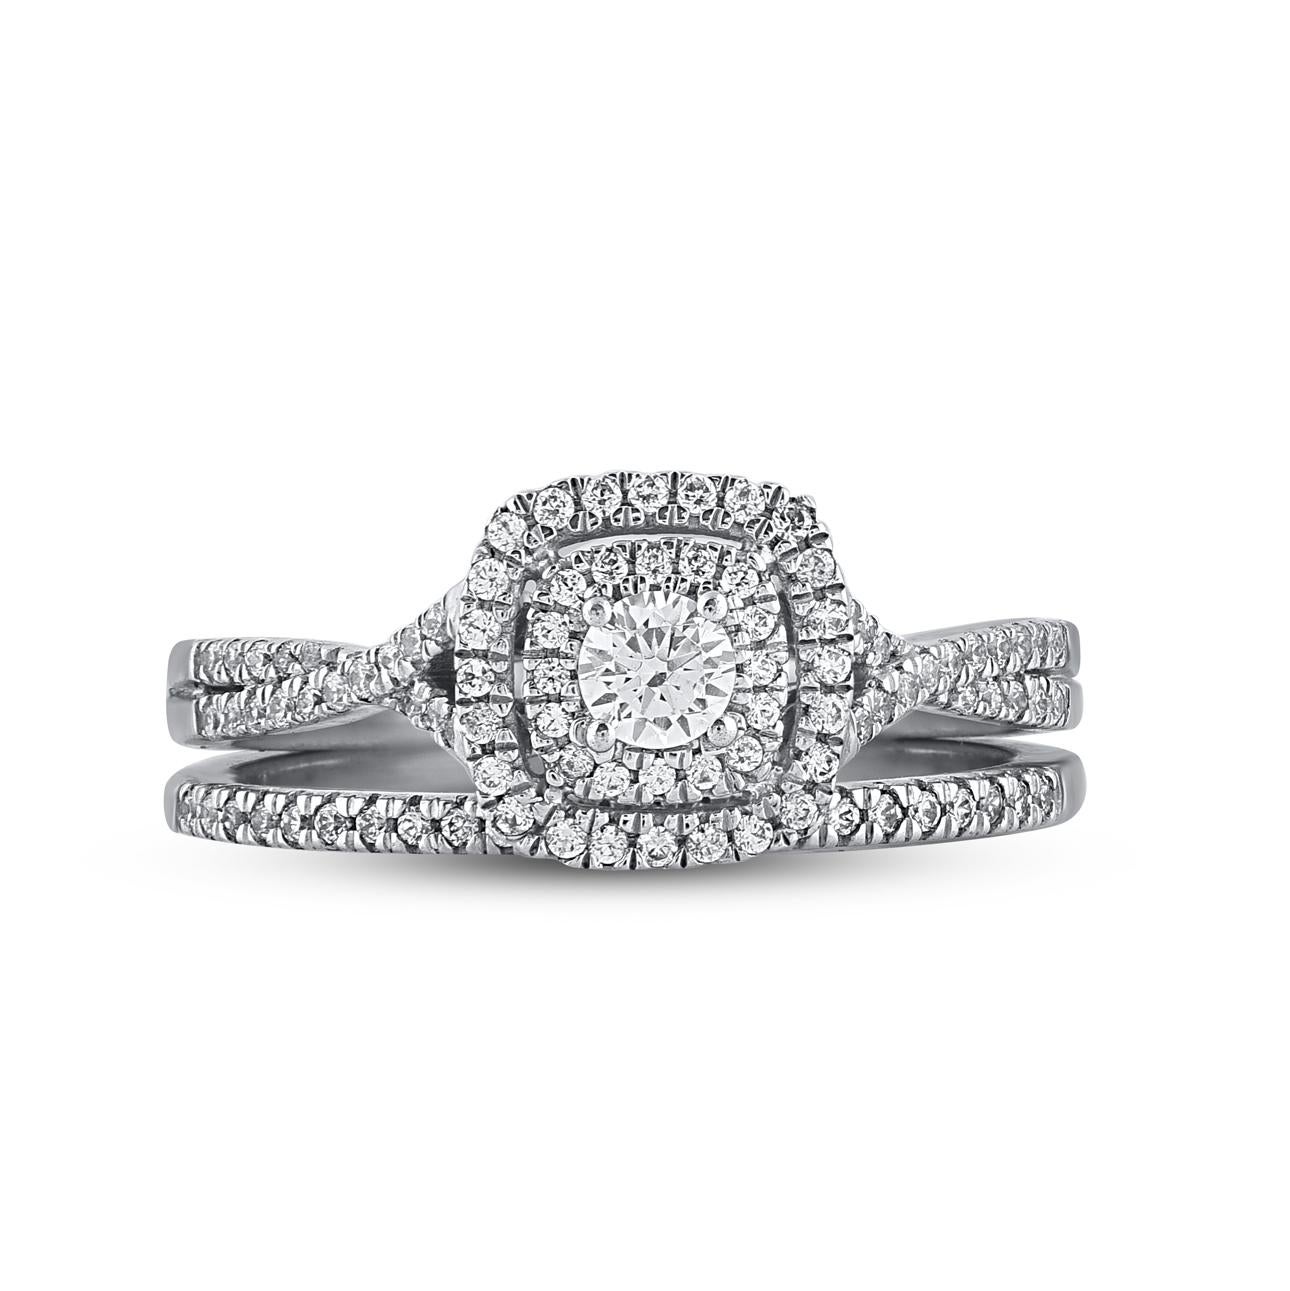 Express your love with this classic and traditional diamond bridal set. Crafted in 14 Karat white gold. This wedding ring features a sparkling 100 brilliant cut and single cut round diamonds beautifully set in prong setting. The total diamond weight